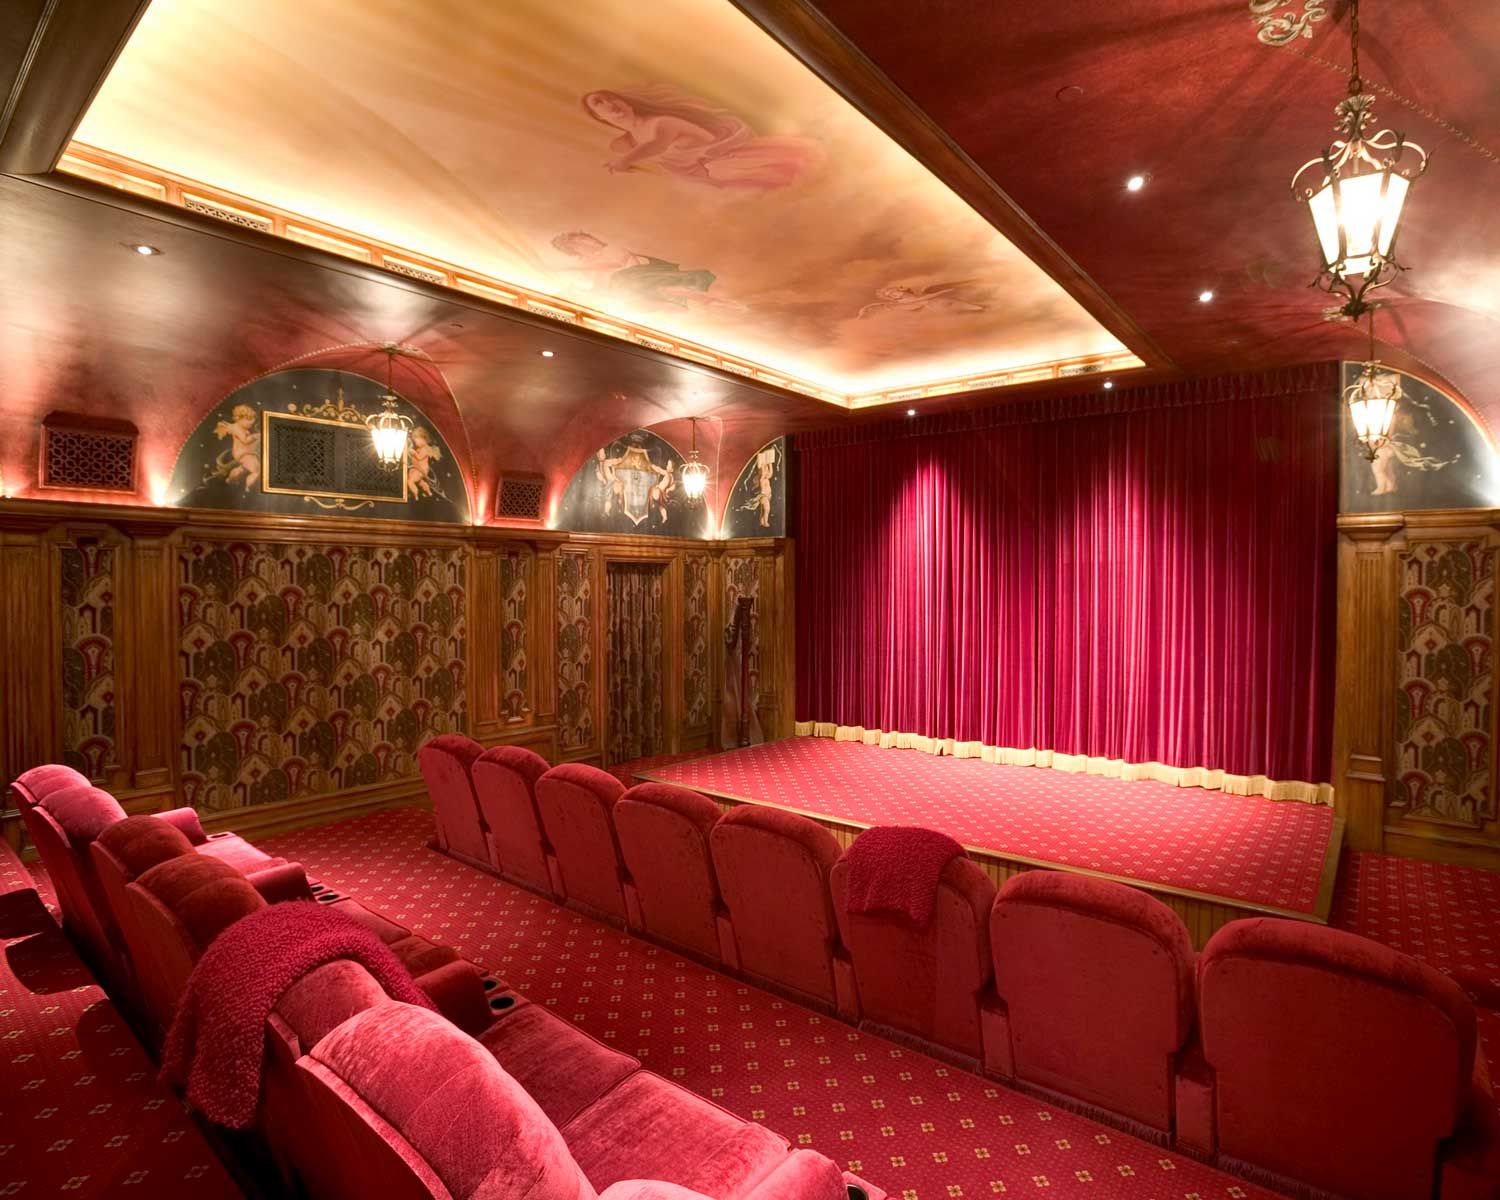 Screening Room, Mansion, Future Home, Theater